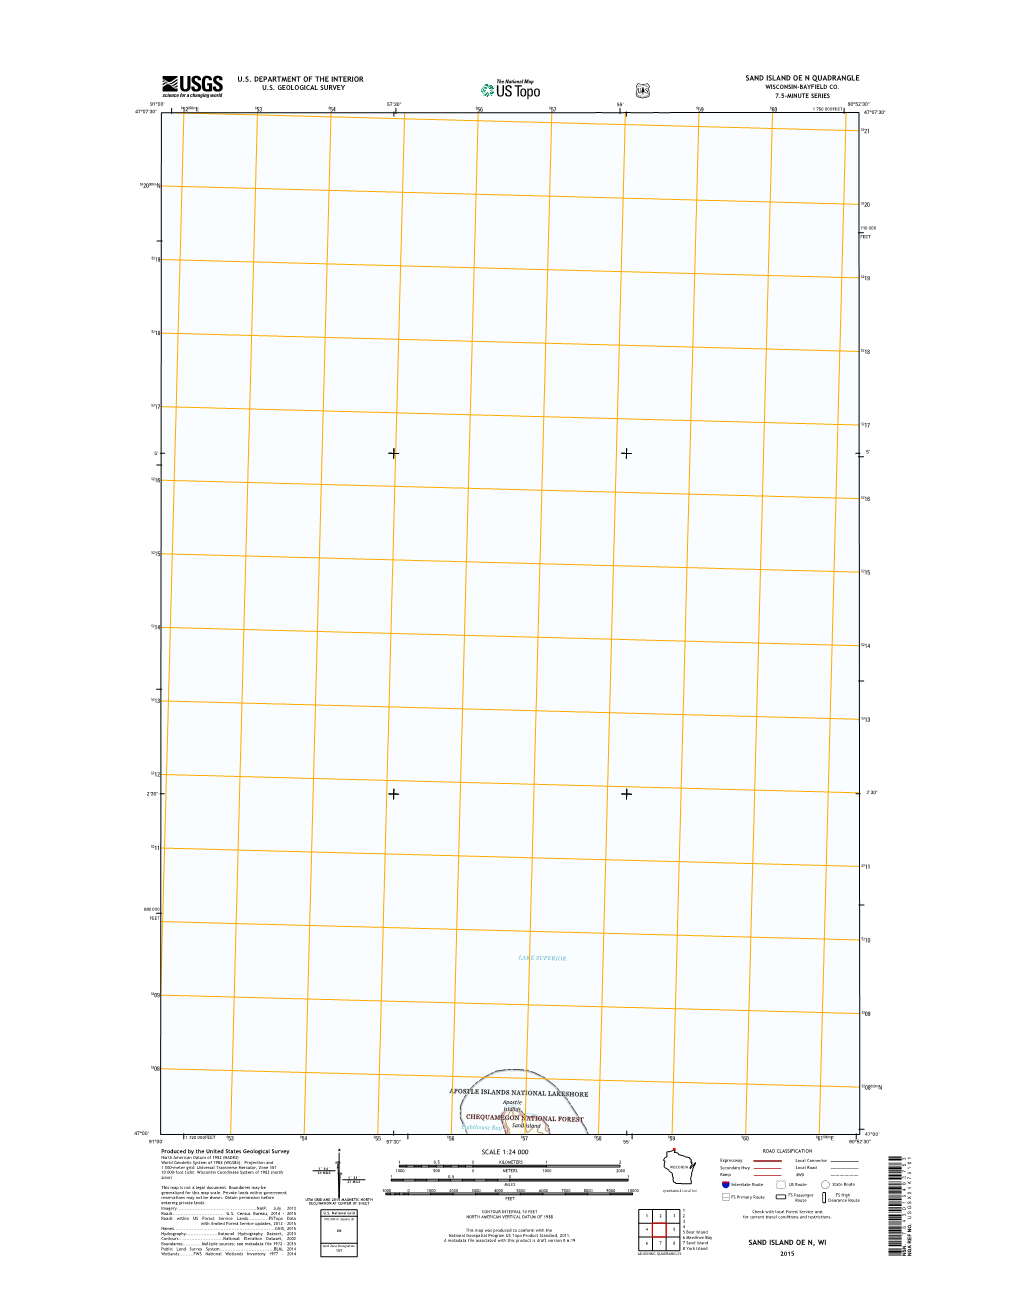 USGS 7.5-Minute Image Map for Sand Island OE N, Wisconsin